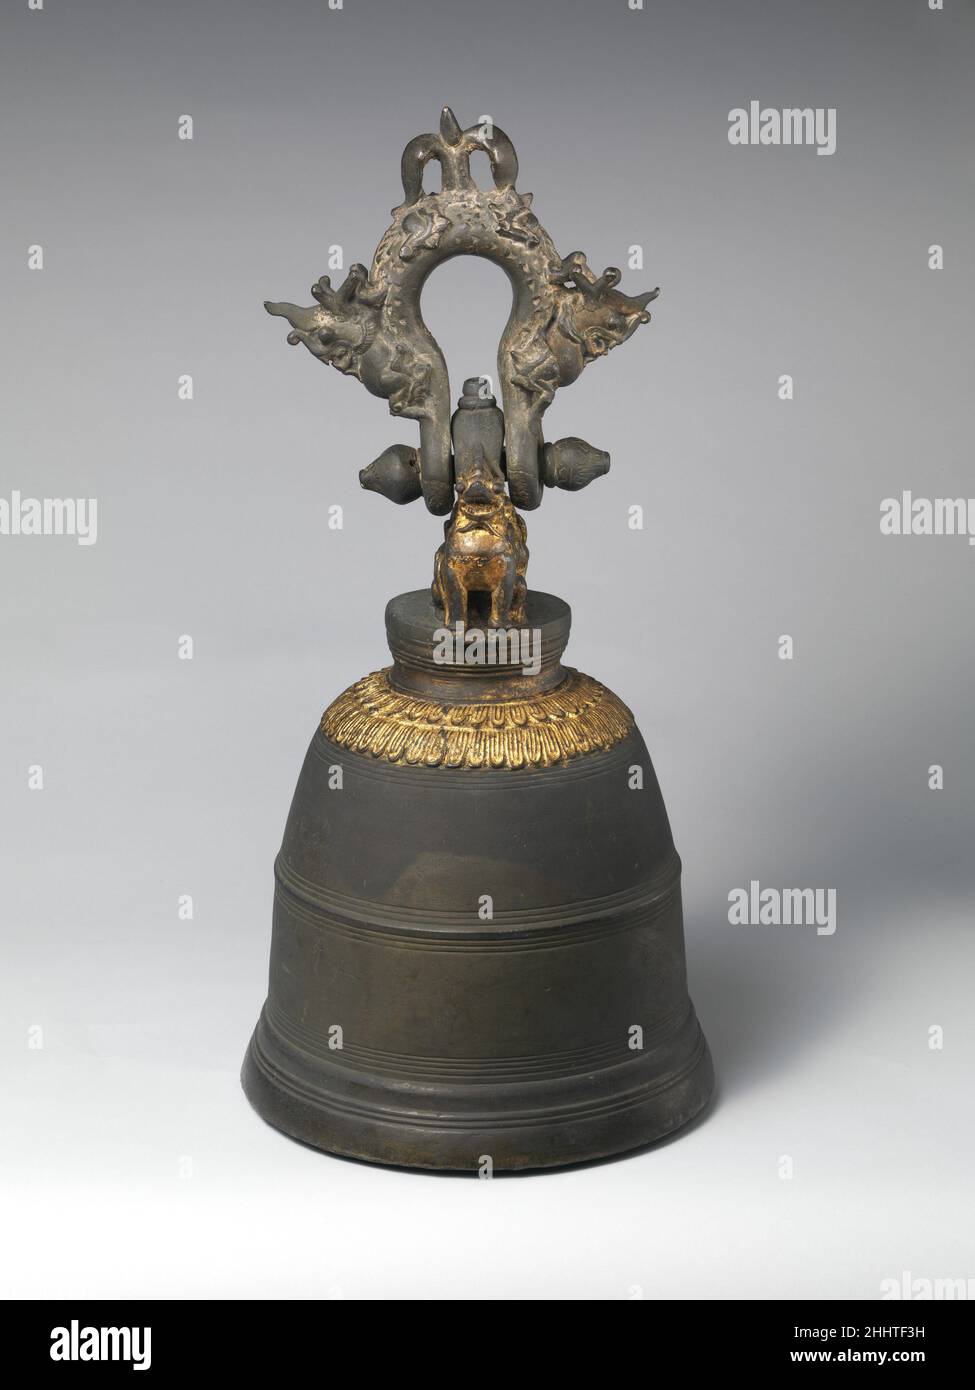 Monastery Bell 1879 Burmese Cast in Shwebo, a town north of Mandalay, this monastery bell weighs approximately one hundred and fifty pounds and is part of an ancient tradition of elaborately adorned clapperless bronze hanging temple bells found throughout Southeast Asia and Indonesia. The support mounts, attached above a stylized and gilded double lotus design appearing on the bell's shoulder, take the form of two guardian simbas (mythical lions), while the suspension loop is cast to represent two makaras (Hindu water monster) whose tails meet to form a finial. On the bell's upper side a barel Stock Photo